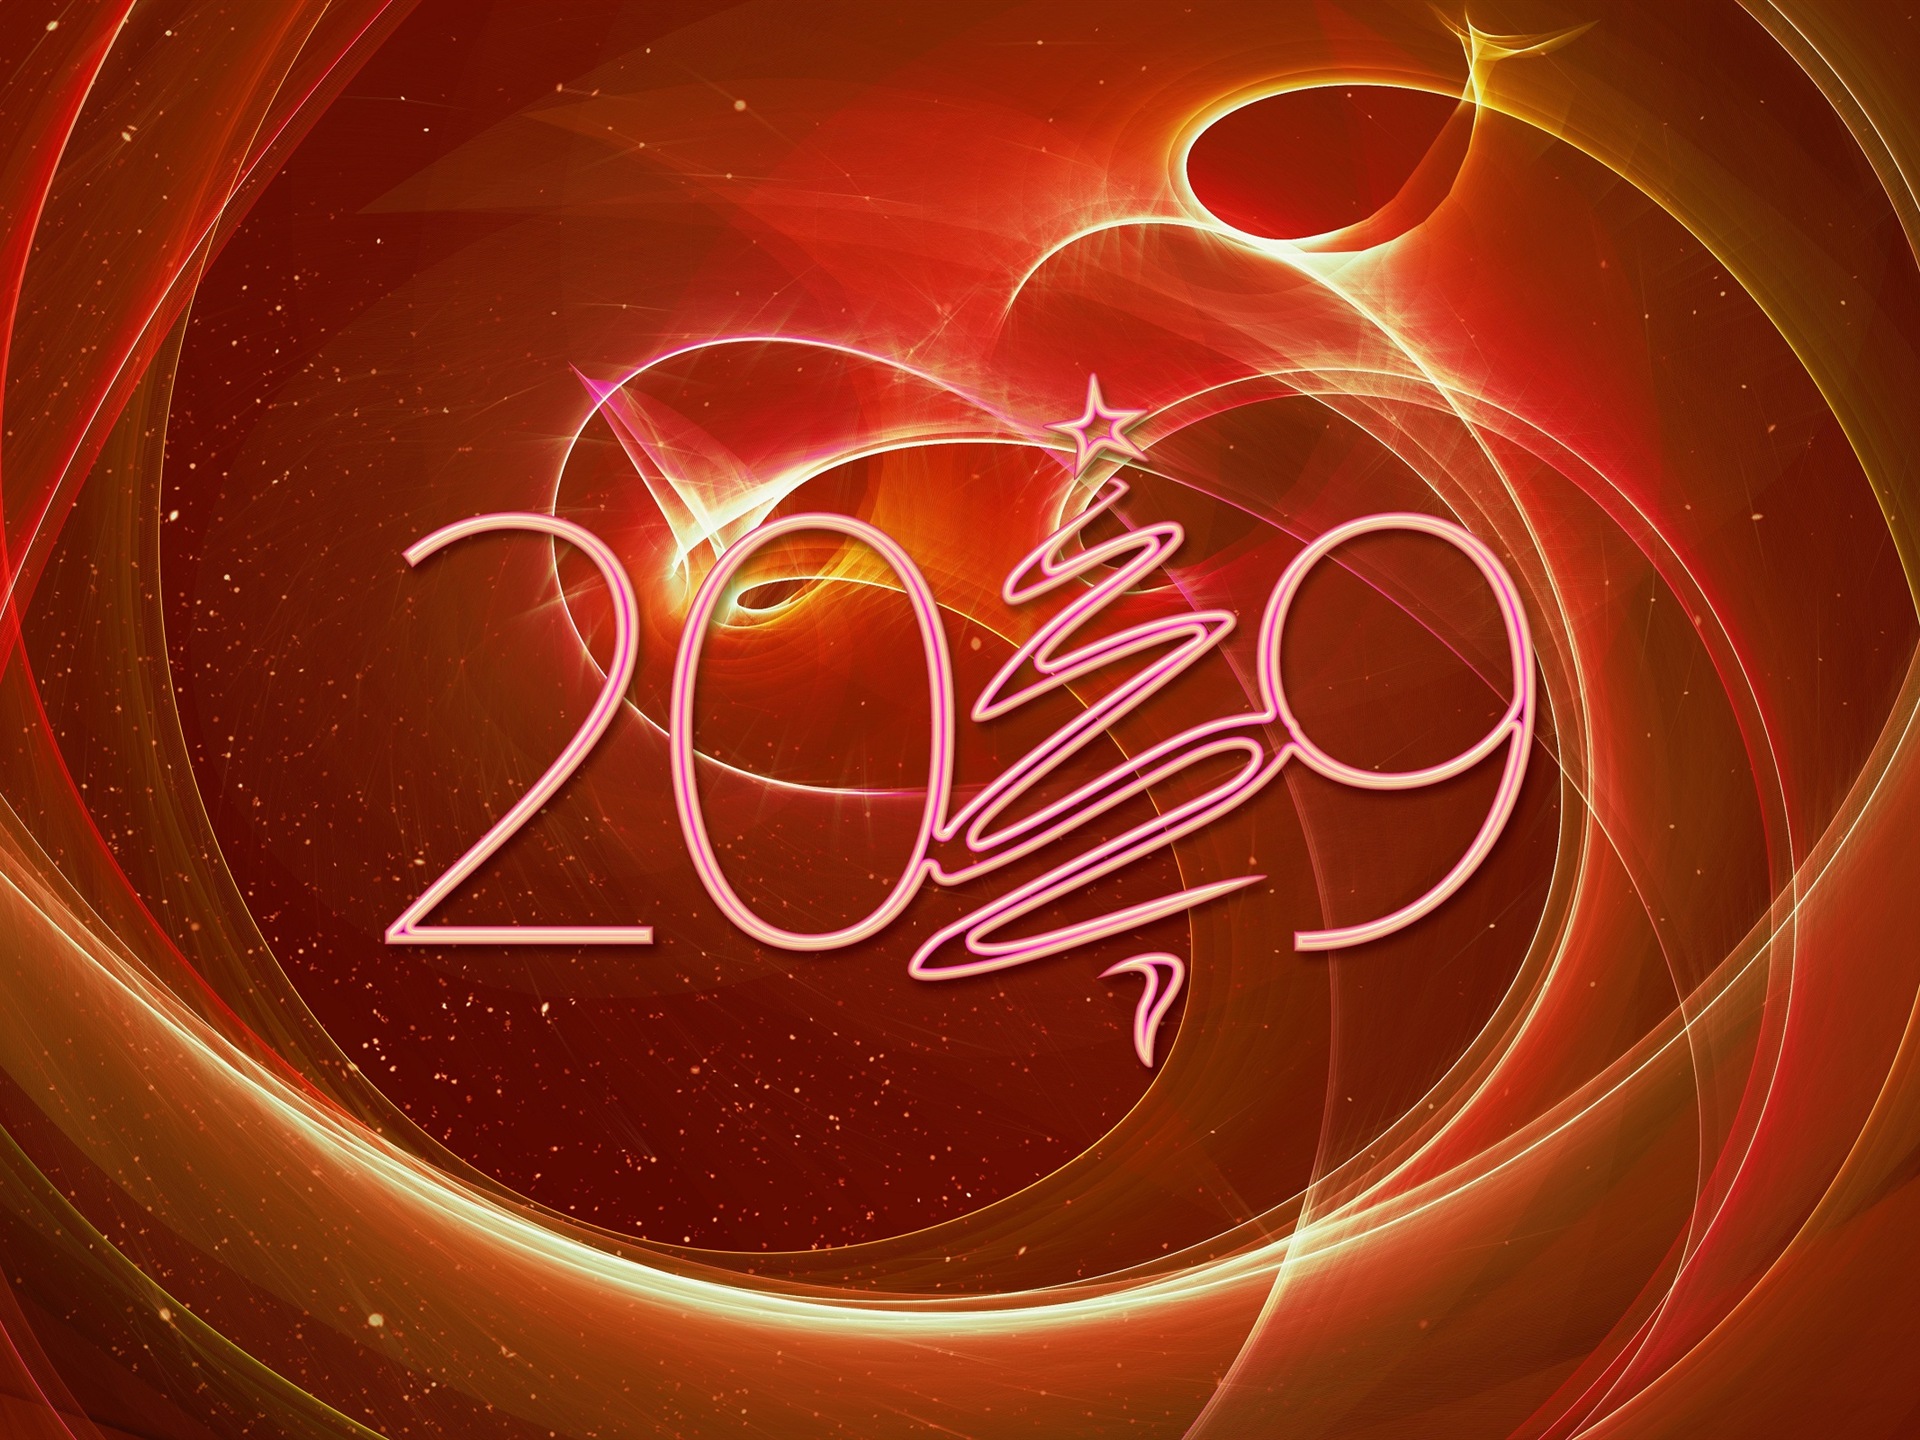 Happy New Year 2019 HD wallpapers #4 - 1920x1440